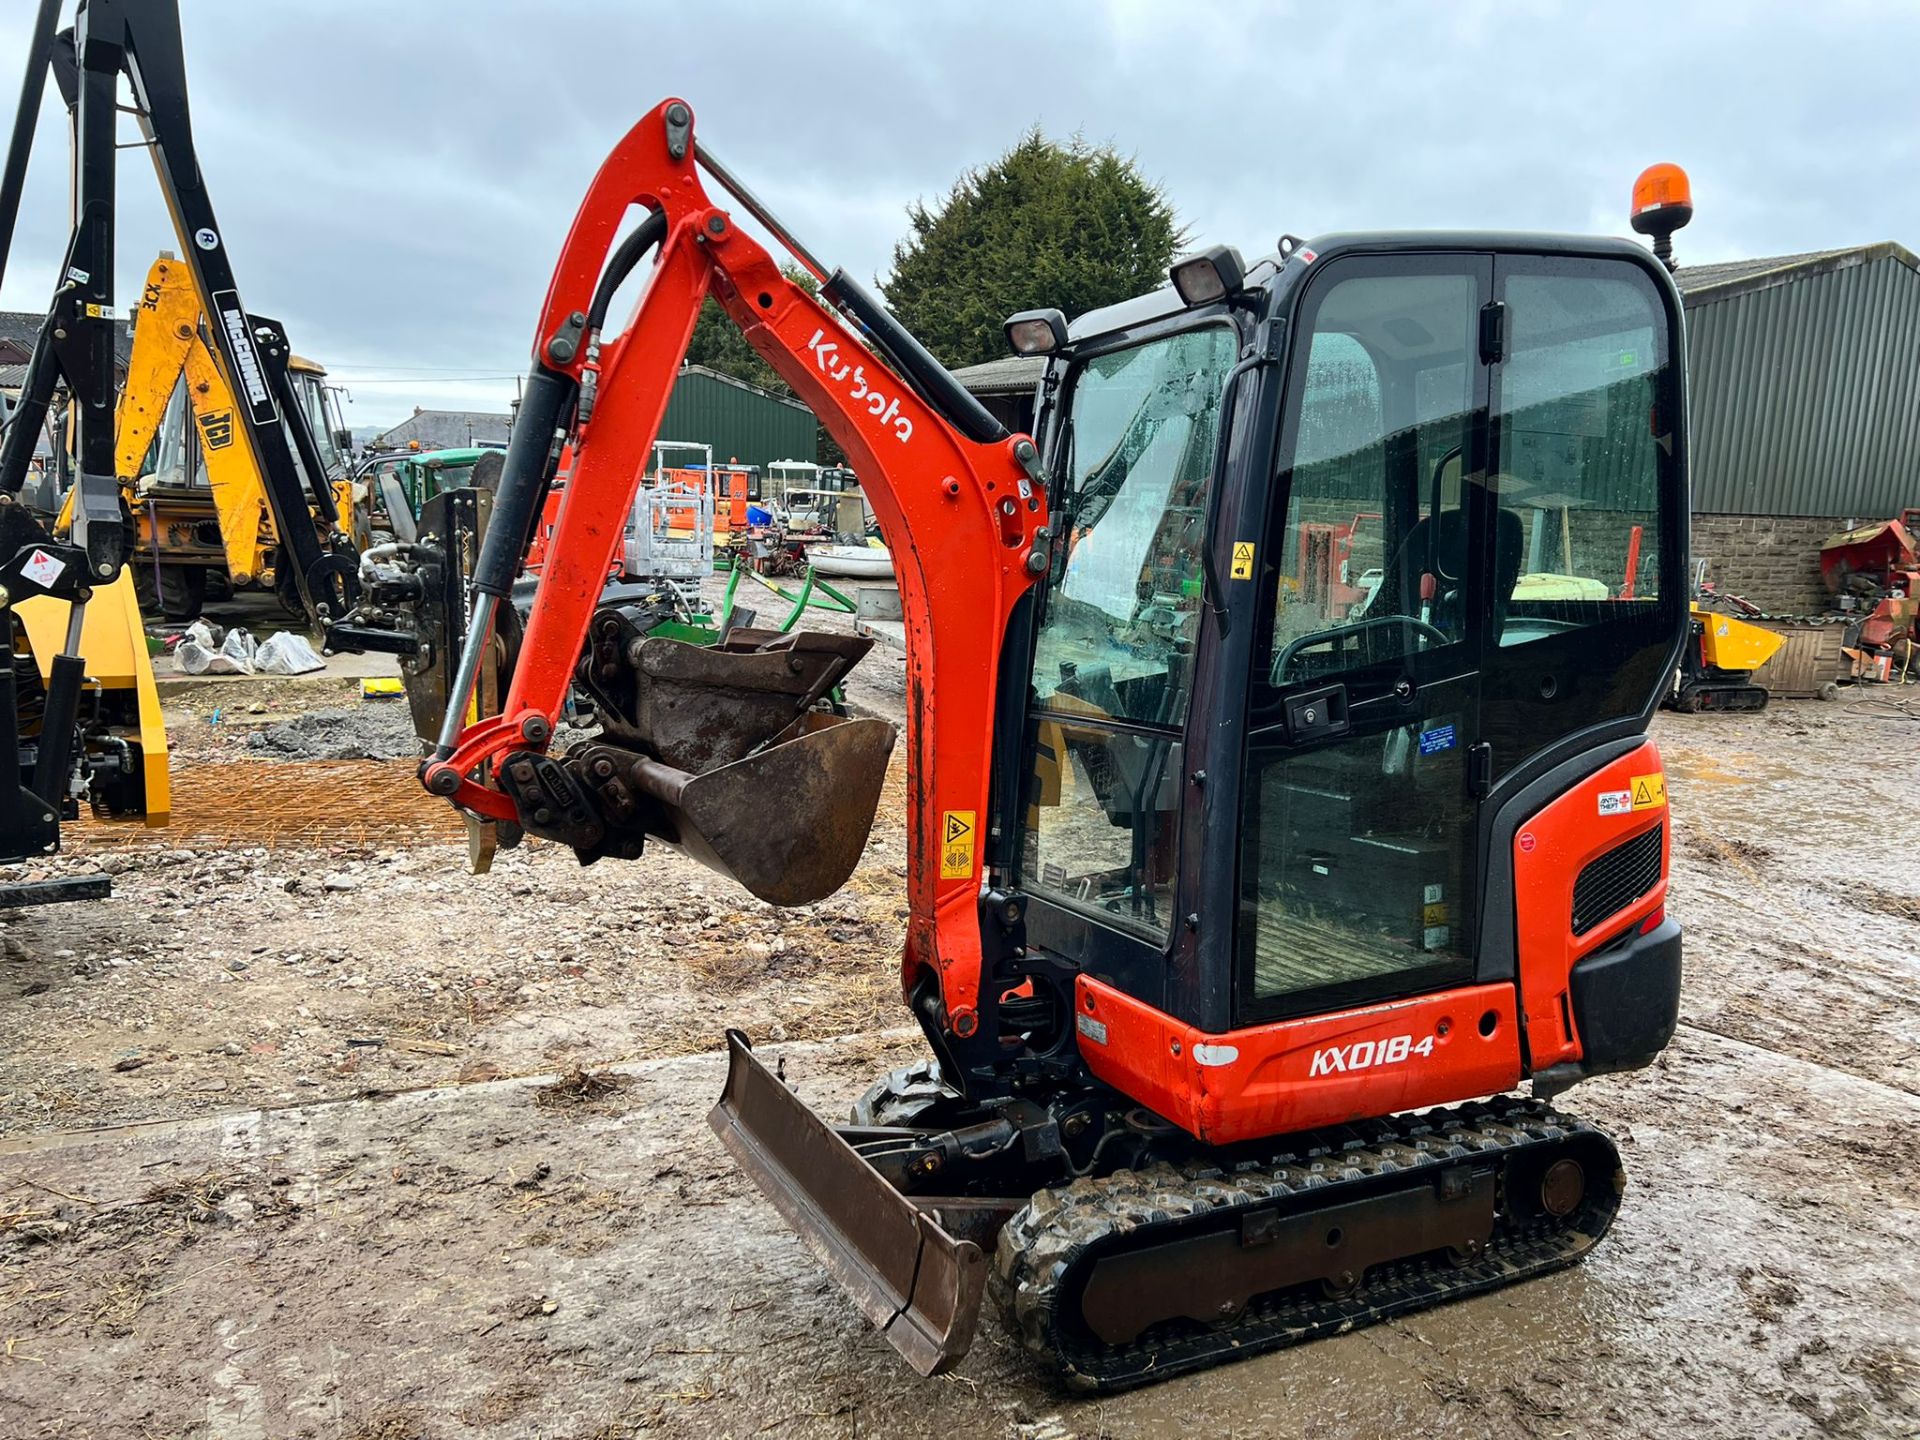 2018 KUBOTA KX018-4 1.8 TON MINI DIGGER, RUNS DRIVES AND DIGS, SHOWING A LOW 1681 HOURS - Image 3 of 20